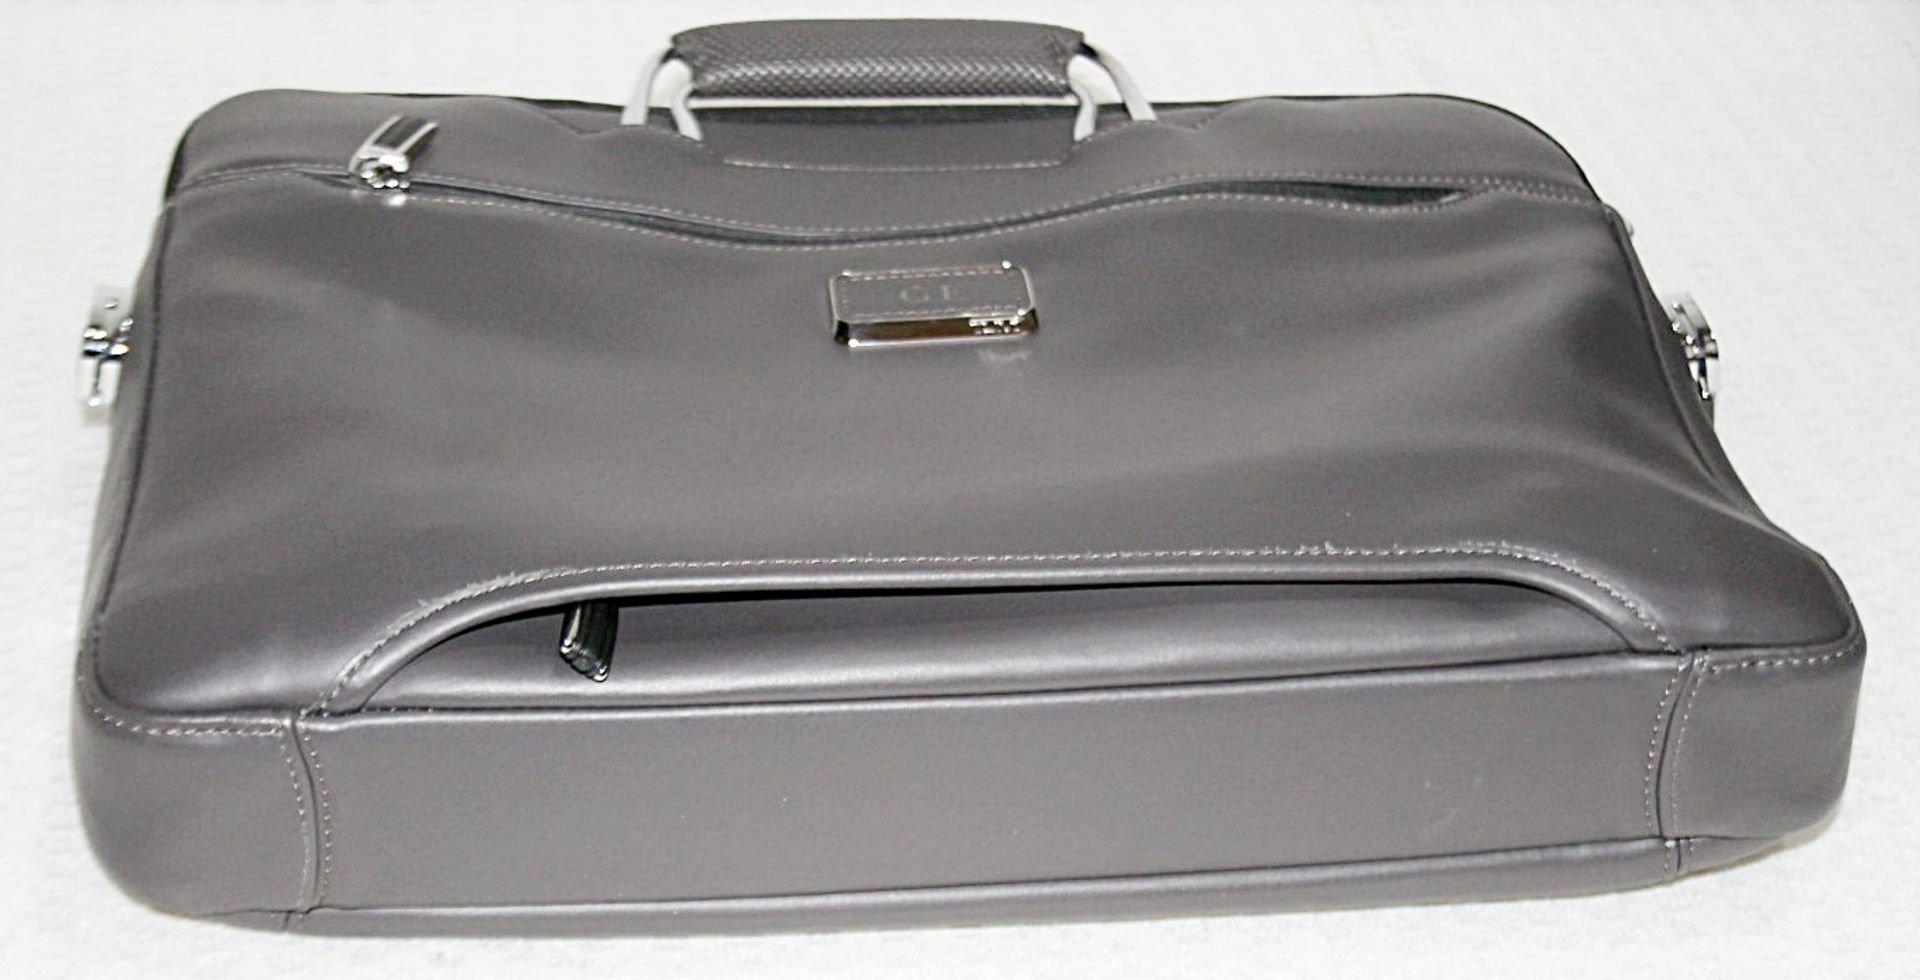 1 x TUMI Luxury Leather Slim Brief Case With Strap In A Taupe / Gunmetal Grey - Original Price £745 - Image 12 of 14